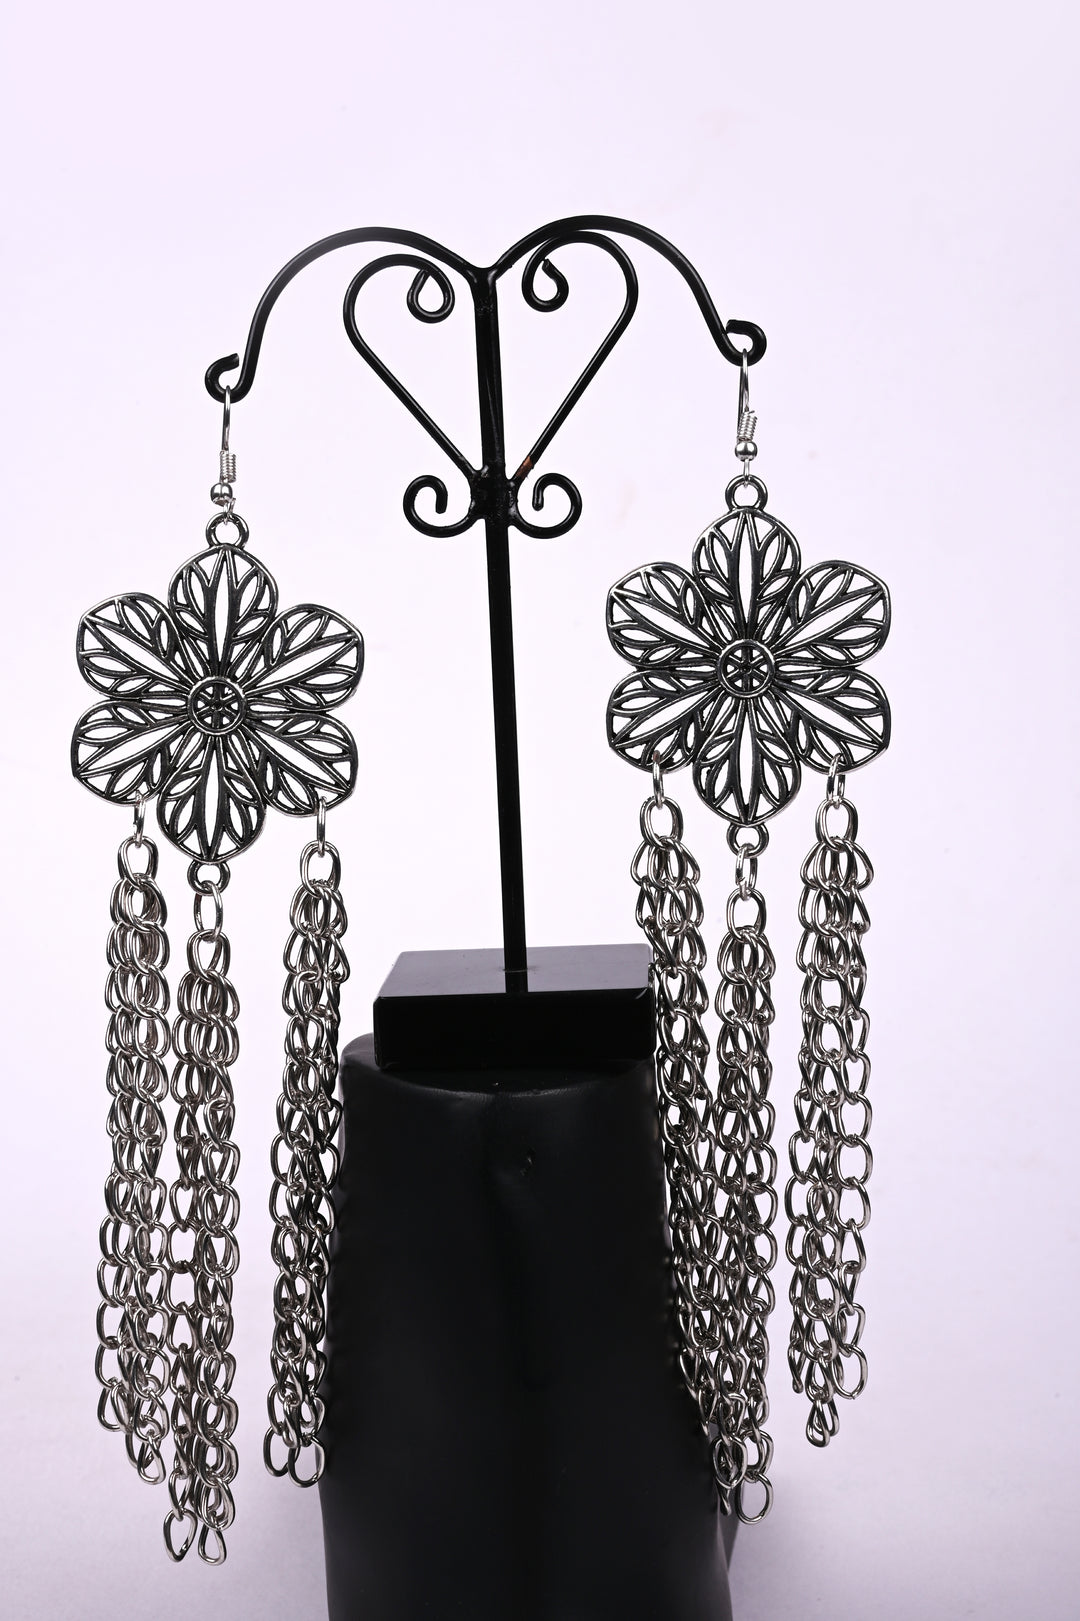 Stunning Flower Shaped Metal Big Charm Earring Styled With Multi Layered Metal Chain Hanging At The Bottom